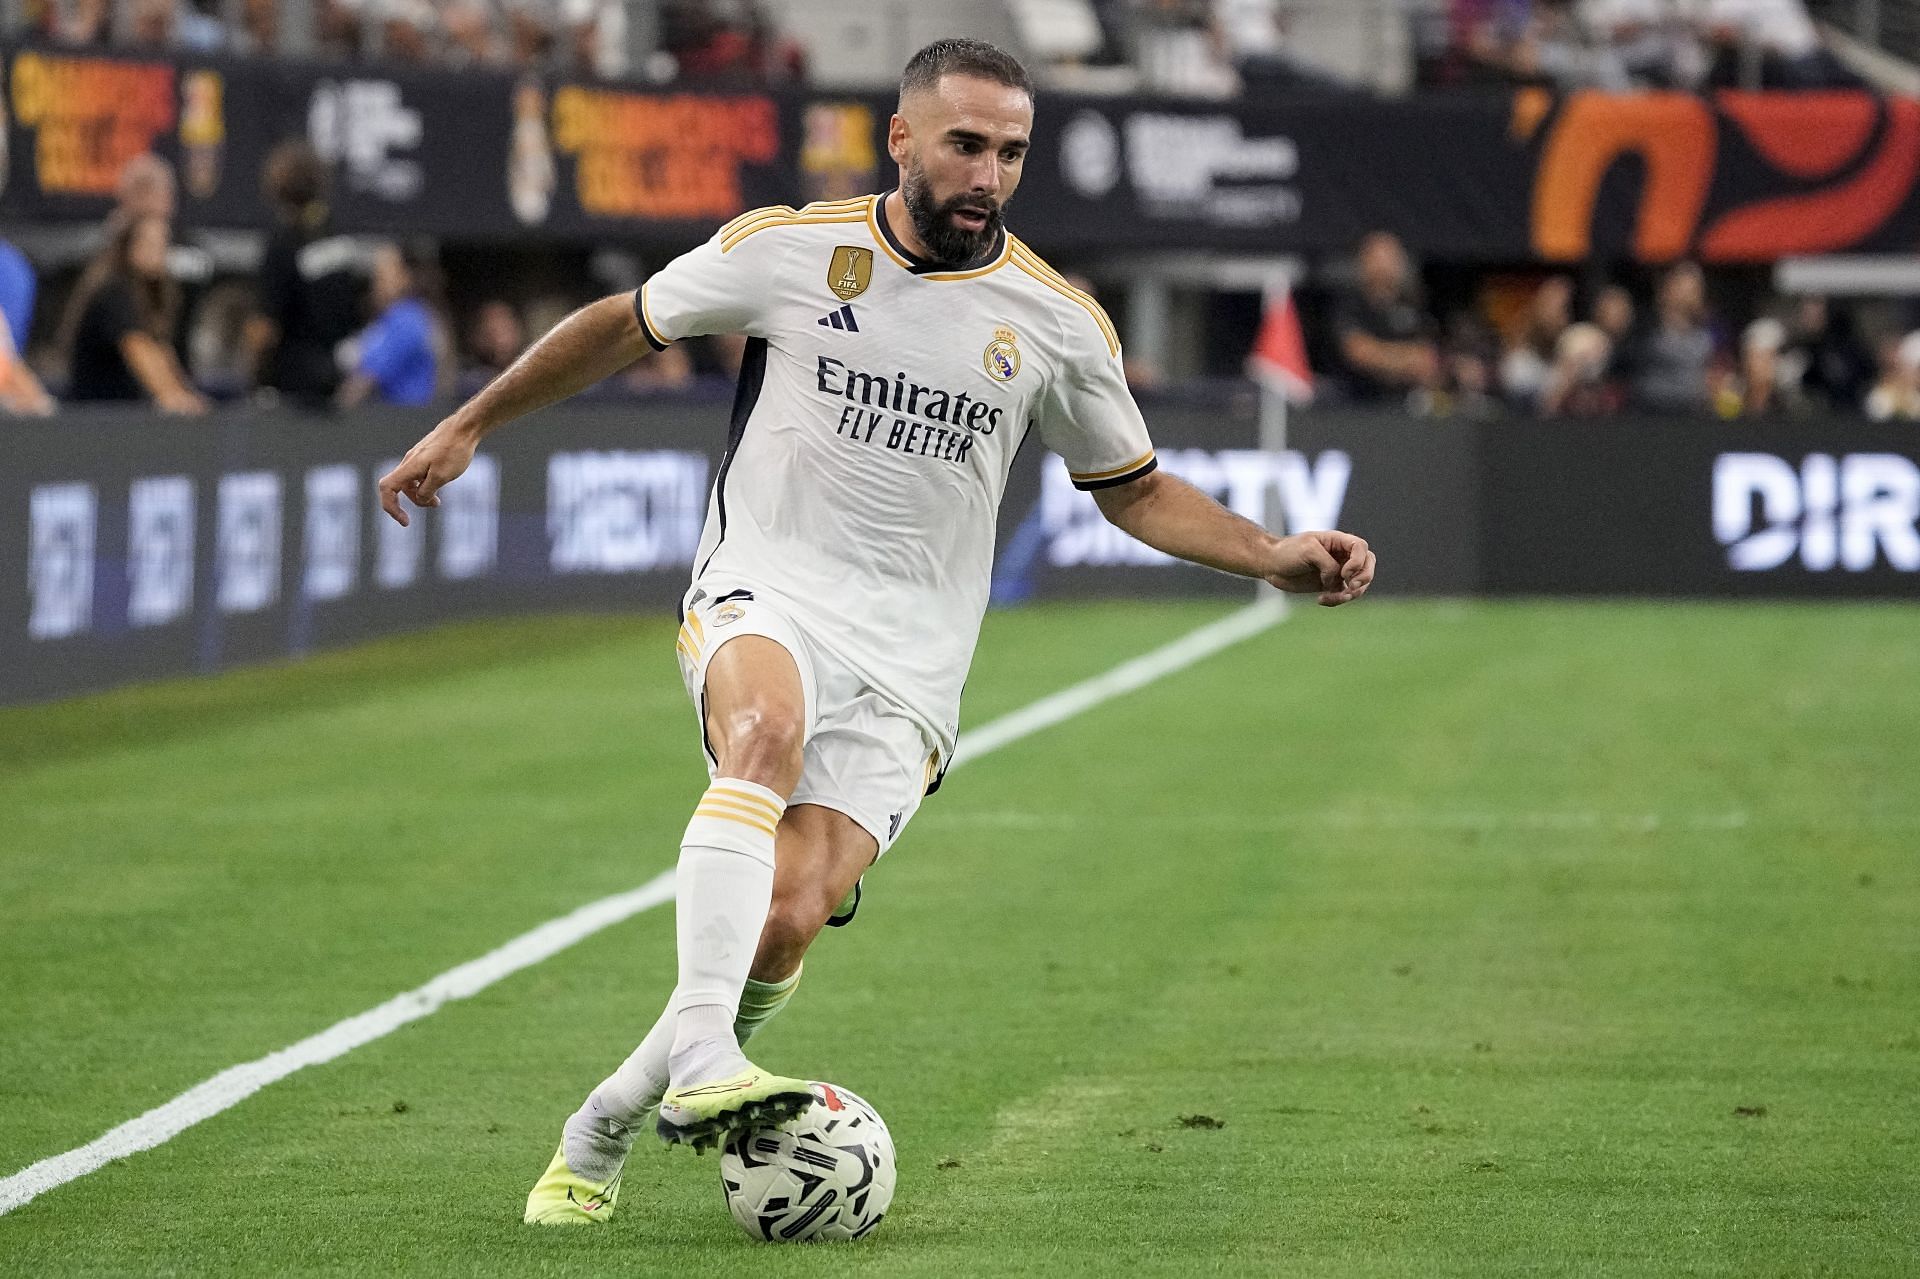 Dani Carvajal has shared his take on the Luis Rubiales controversy.